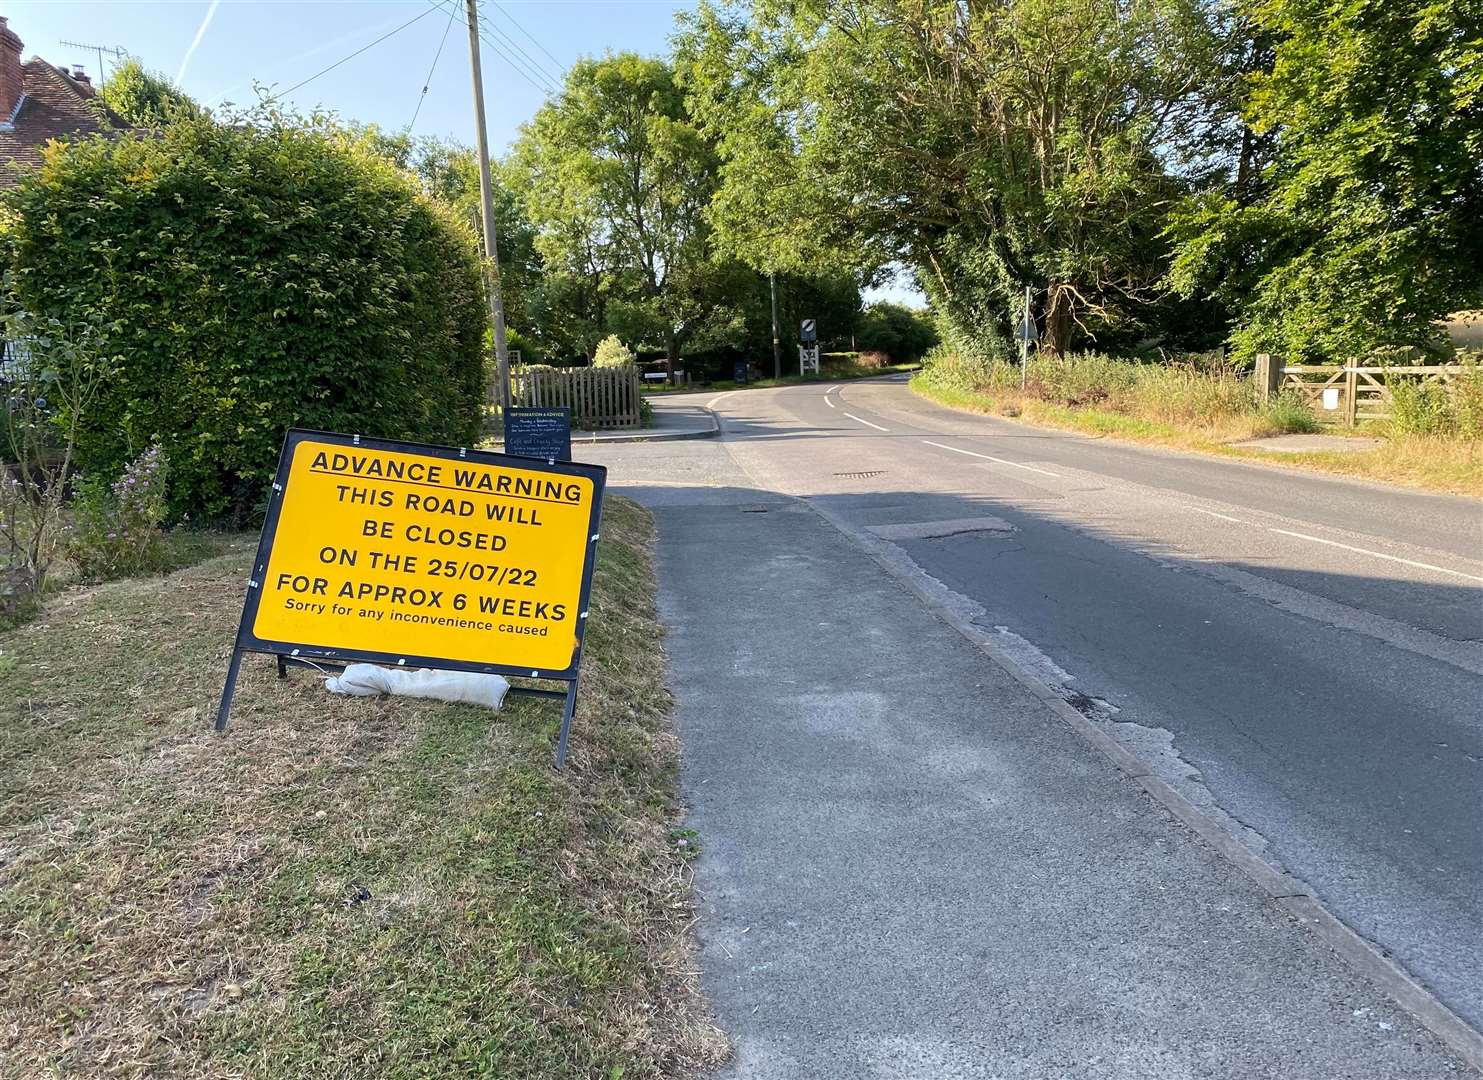 A planned road closure in Lyminge has been halted after local outcry. Picture: Mark Barrett